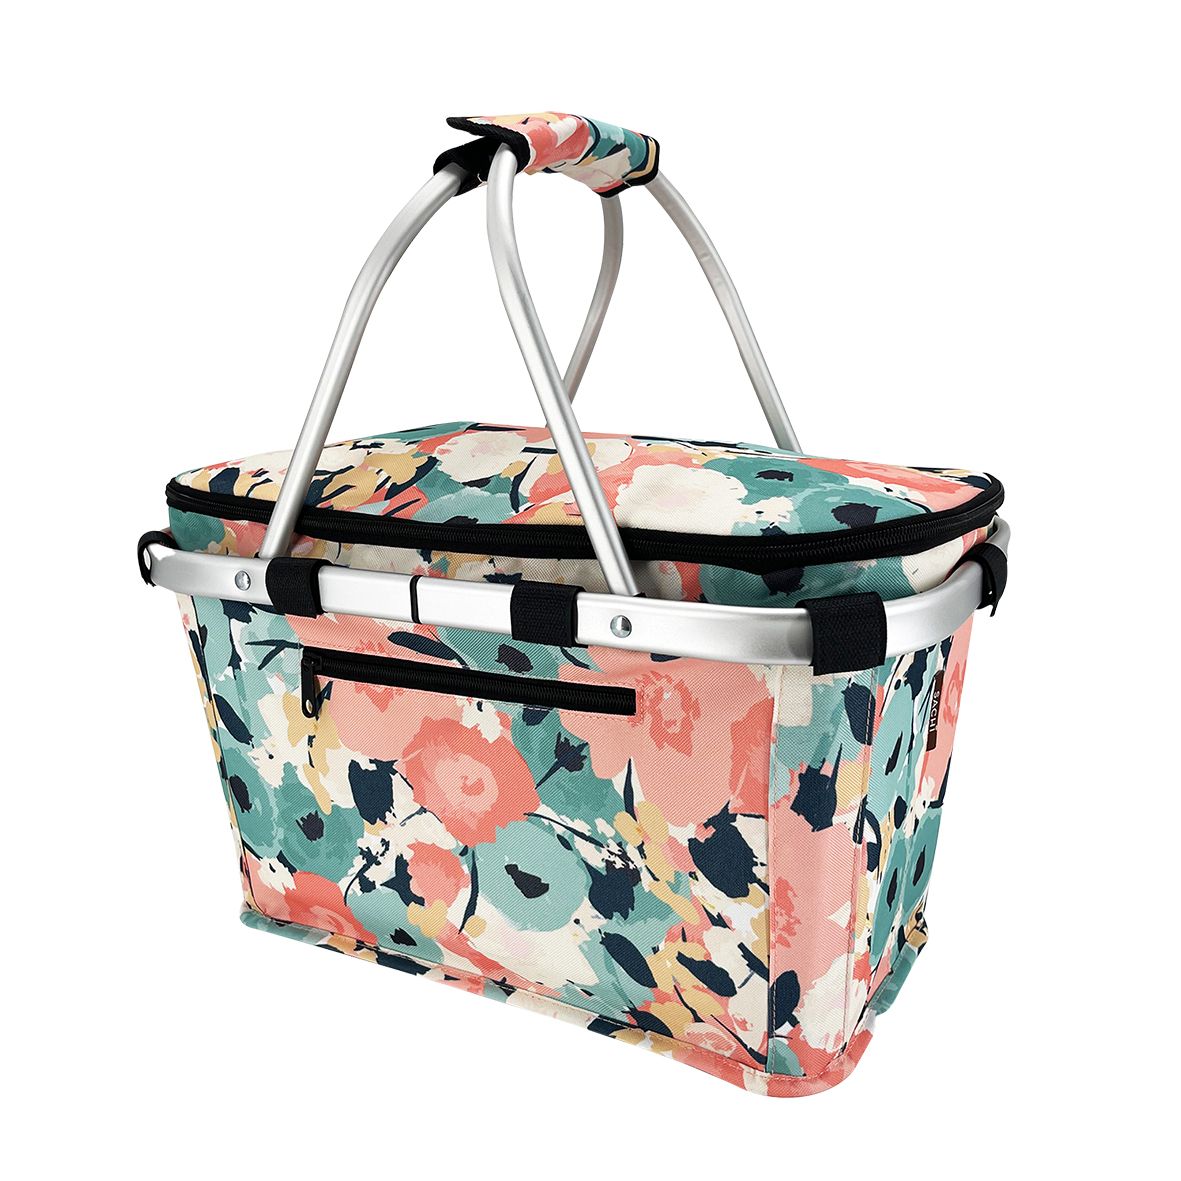 Insulated Carry Basket - Pastel Blooms